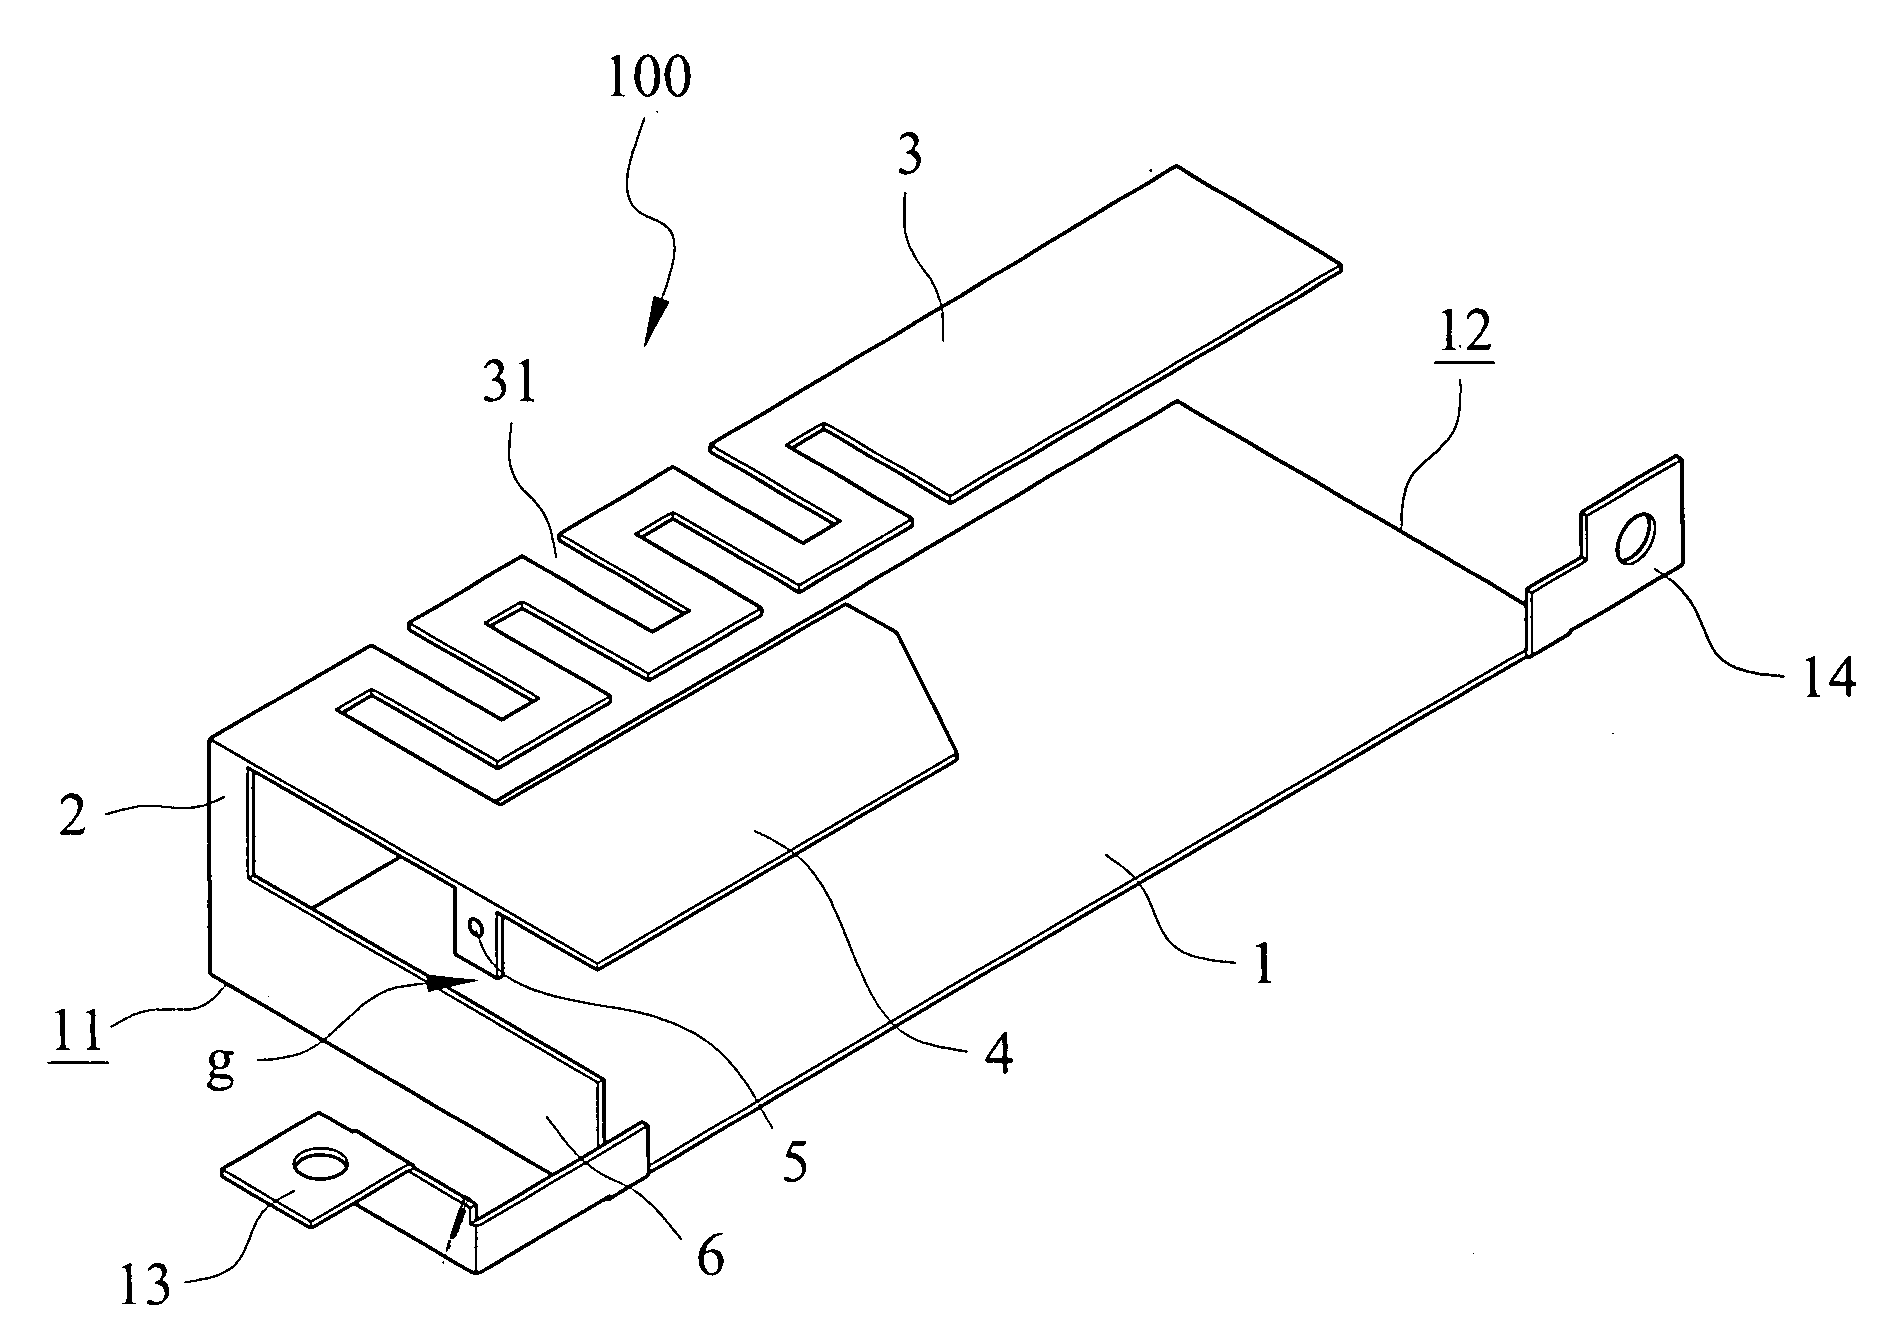 Planar inverted-F antenna with extended grounding plane